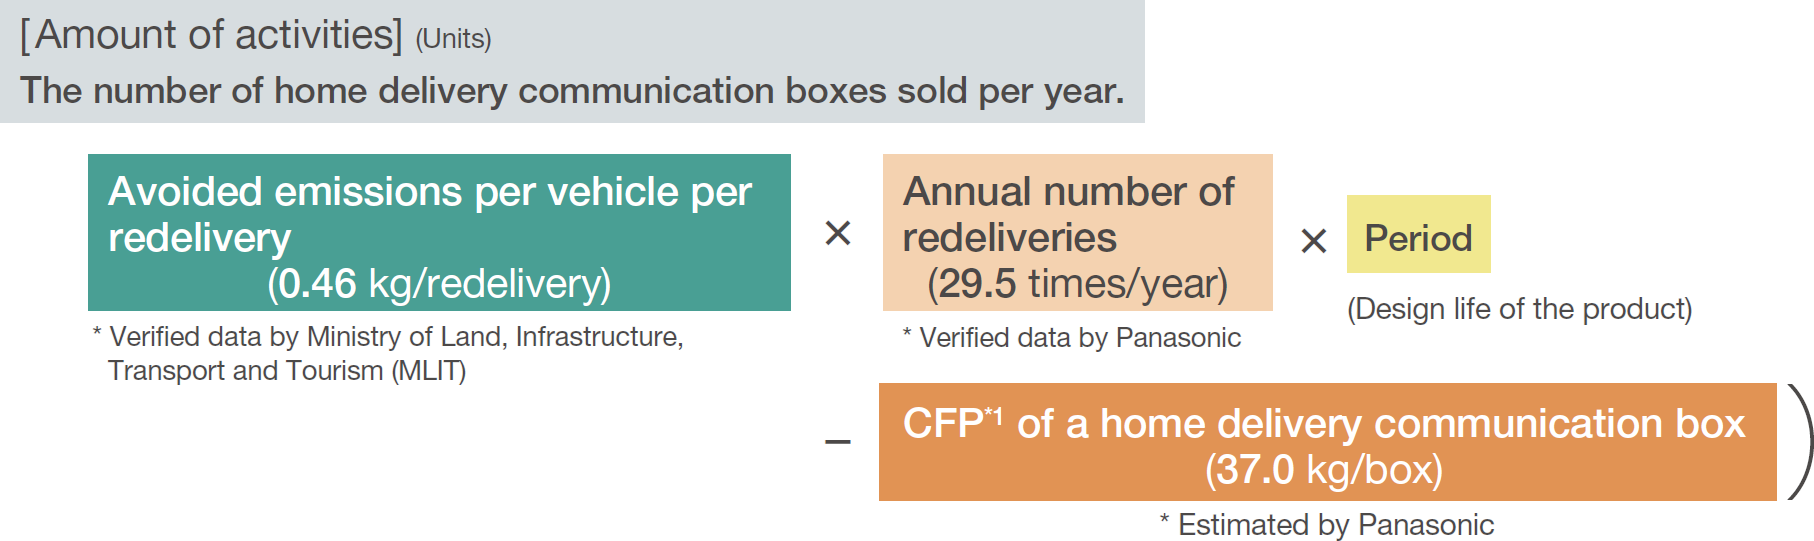 [Amount of activities] (Units) The number of home delivery communication boxes sold per year. Avoided emissions per vehicle per redelivery (0.46 kg/redelivery) * Verified data by Ministry of Land, Infrastructure, Transport and Tourism (MLIT) * Annual number of redeliveries (29.5 times/year) * Verified data by Panasonic * Period (Design life of the product) - CFP*1 of a home delivery communication box (37.0 kg/box) * Estimated by Panasonic)